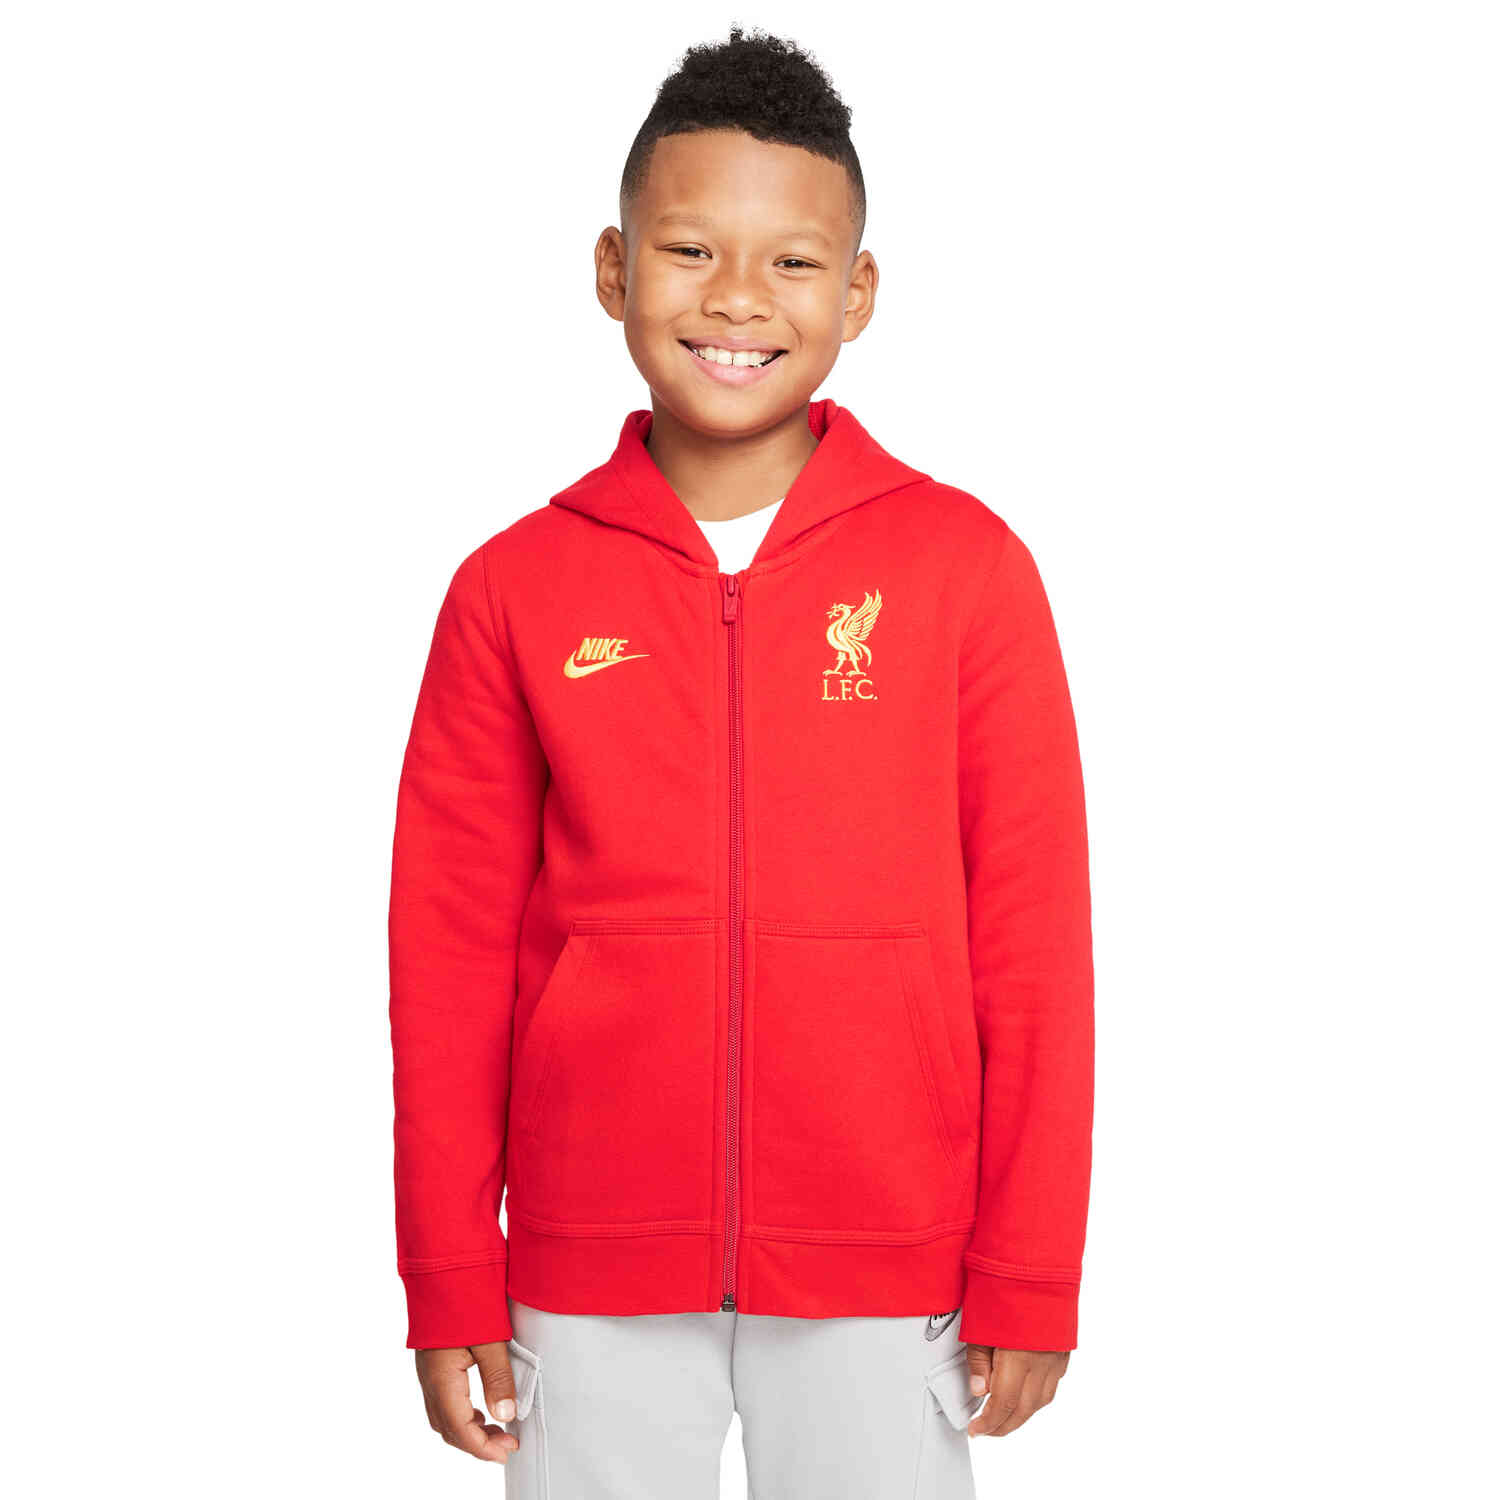 Youth Nike Red Liverpool Club Fleece Full-Zip Hoodie Size: Small